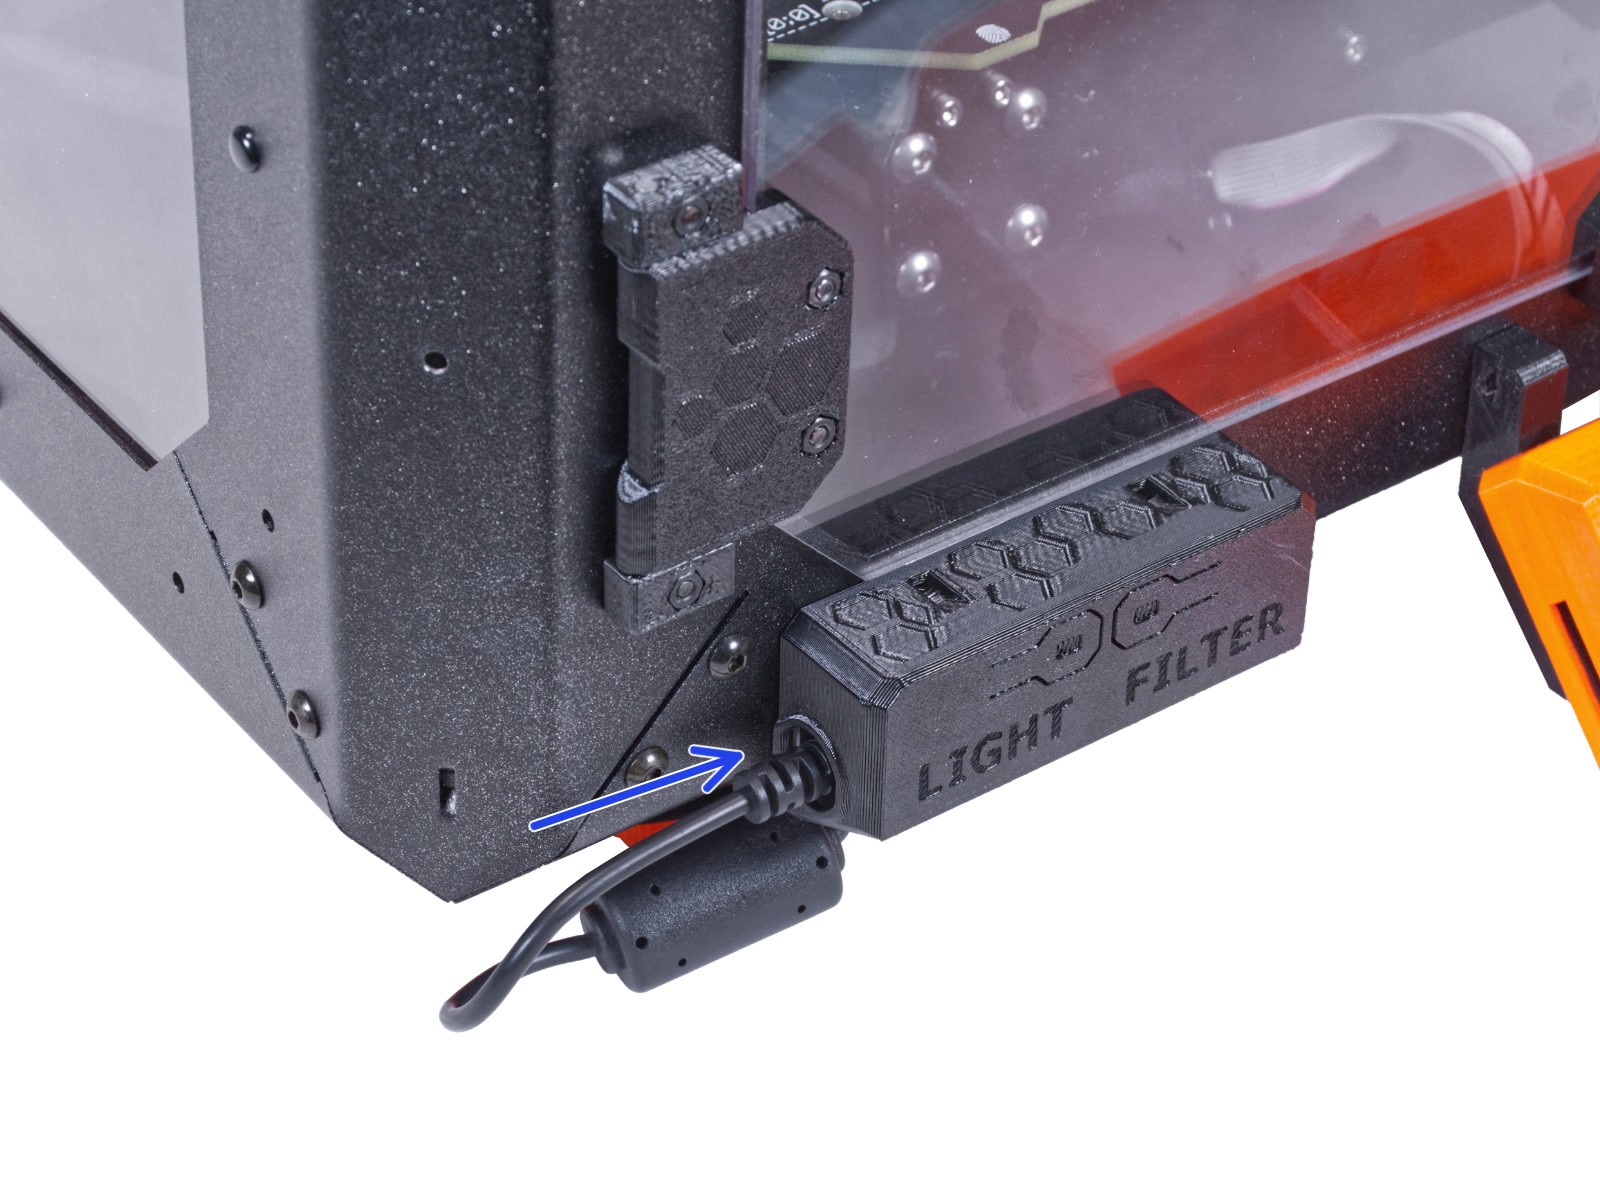 Connecting the external PSU